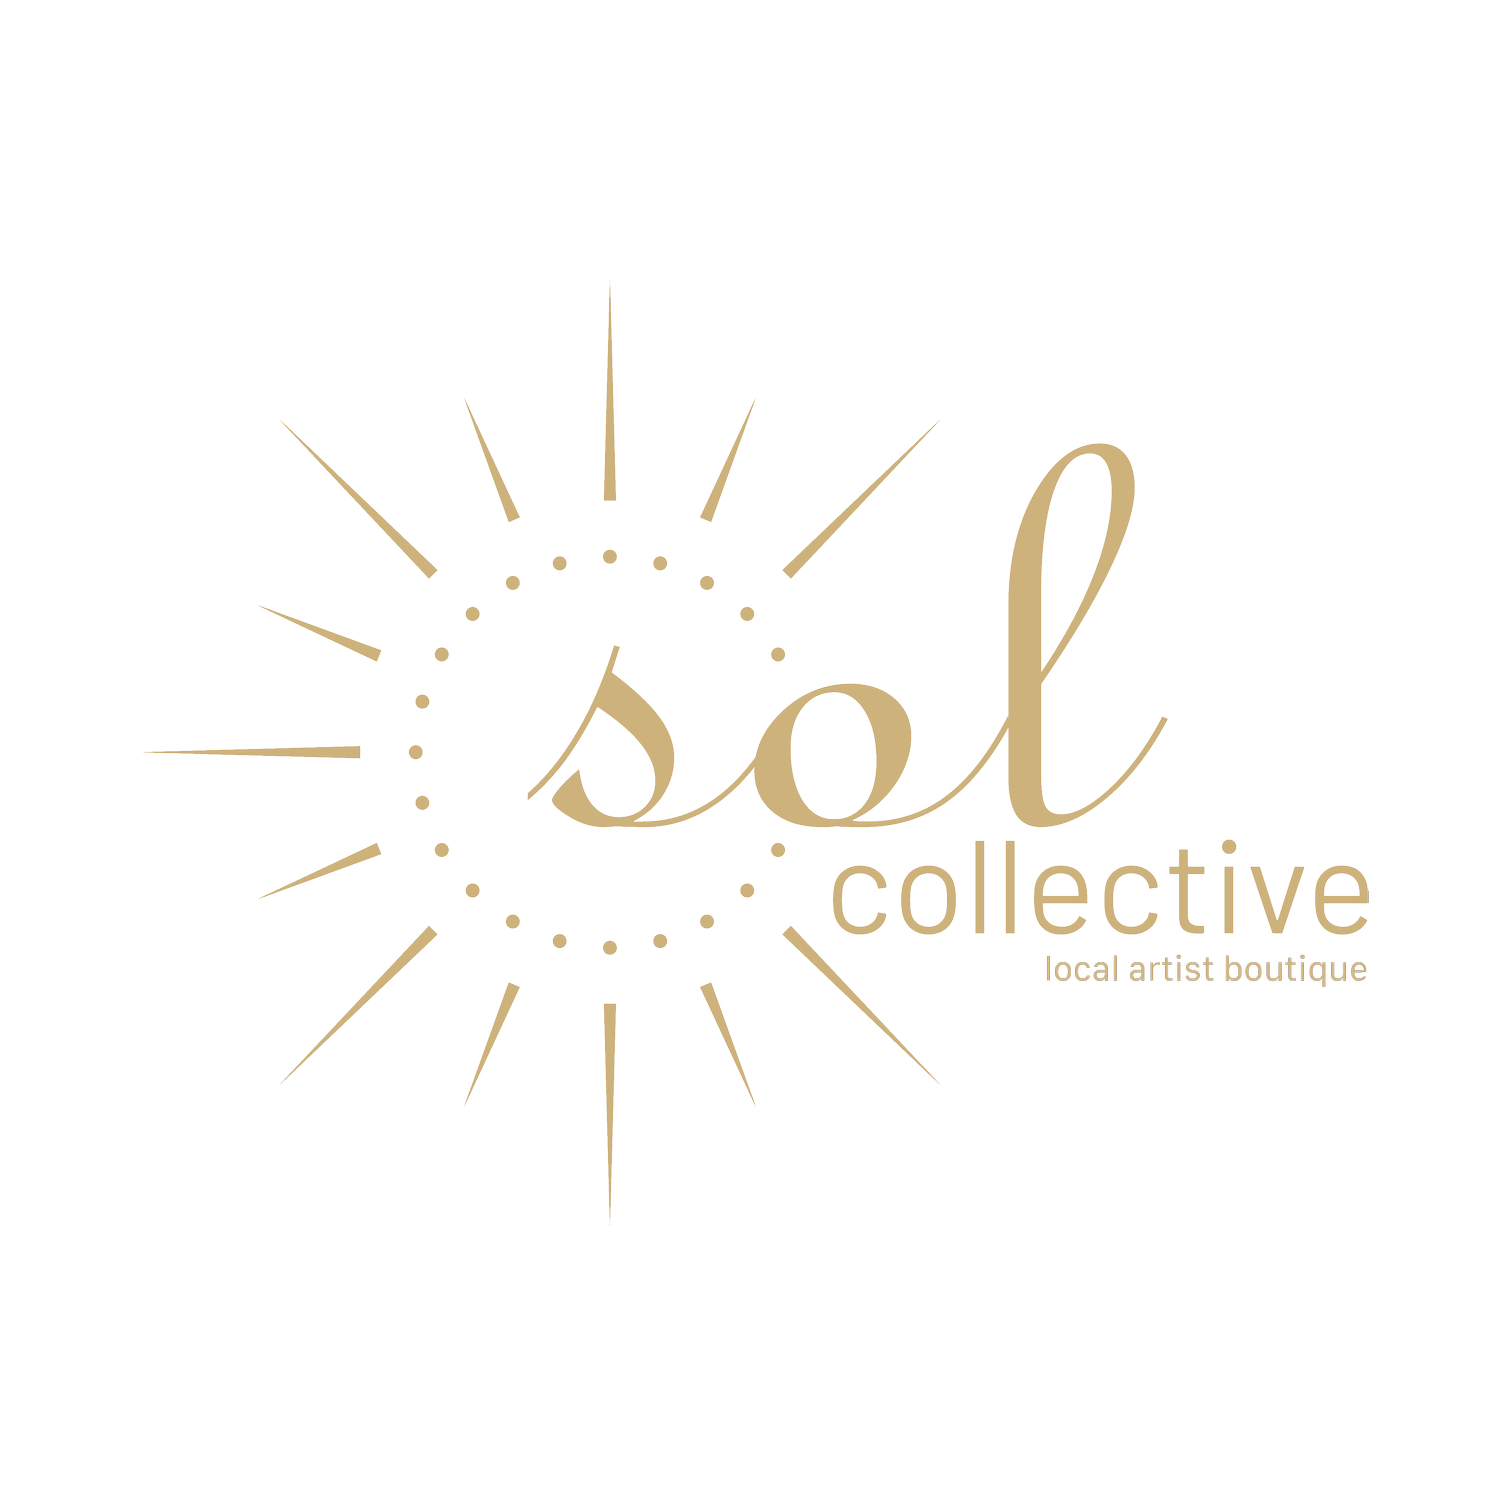 Sol Collective